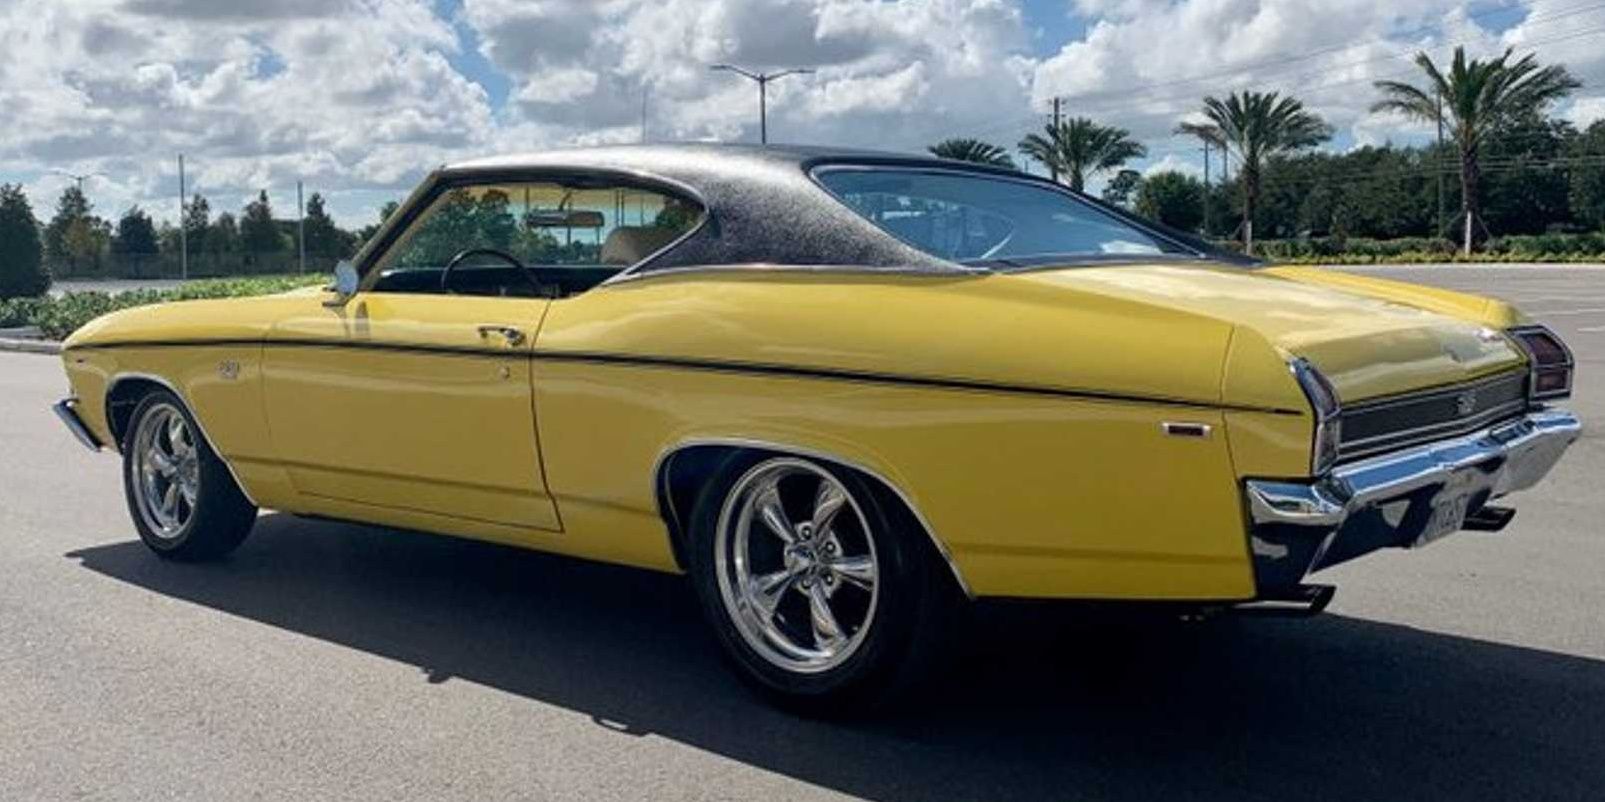 1969 Yellow Chevelle side view